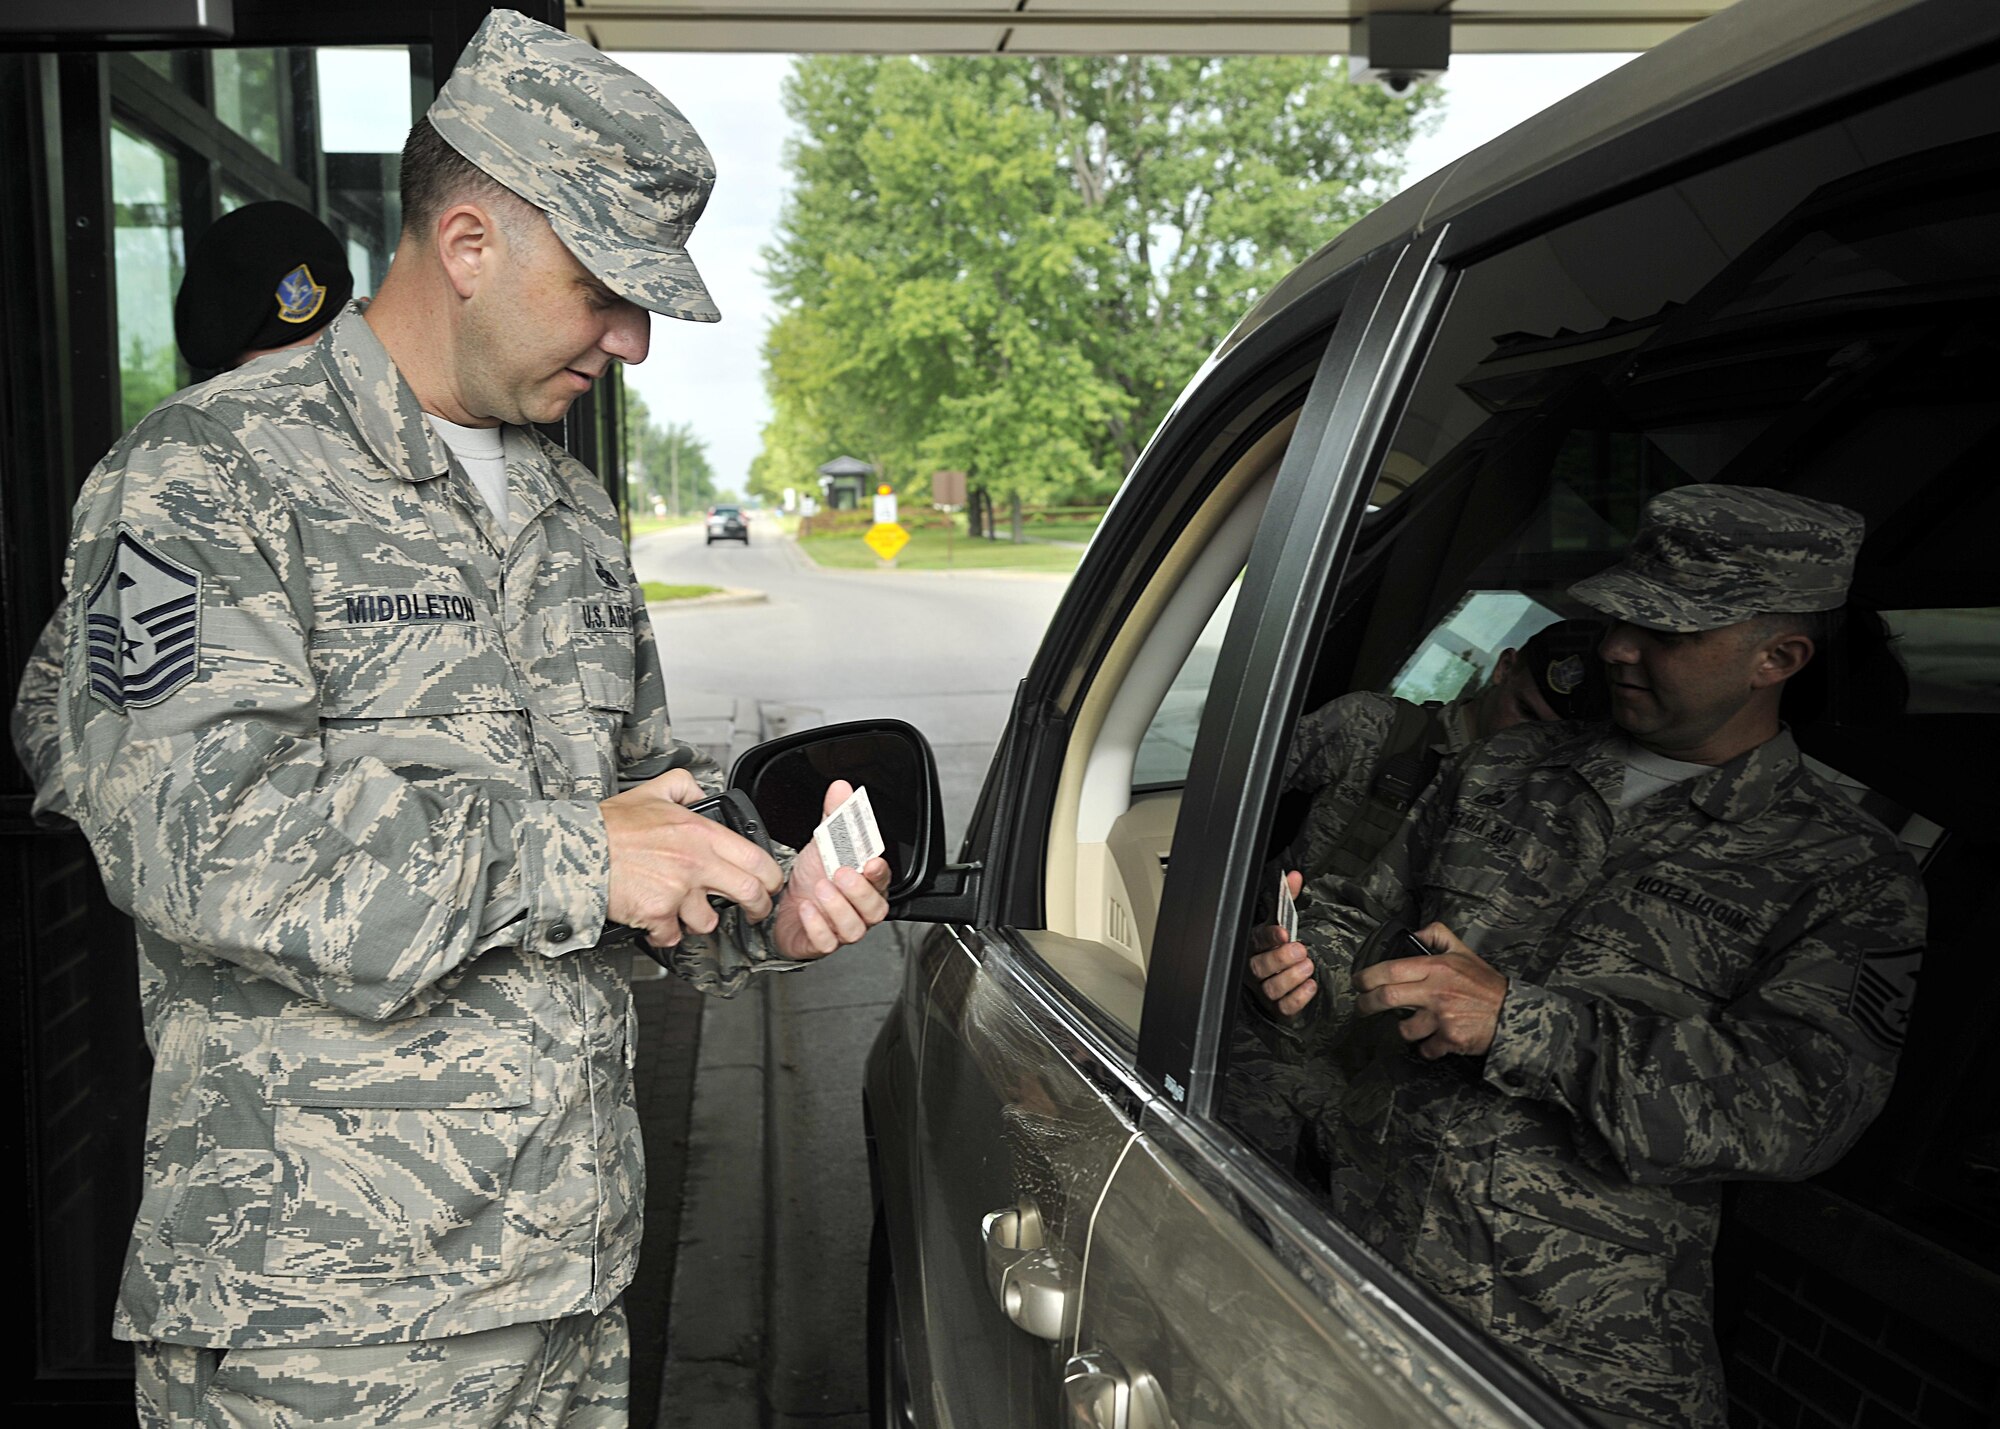 Master Sgt. Stephen Middleton, 319th Security Forces Squadron first sergeant, checks identification cards at the main gate, Aug. 16, 2016, on Grand Forks Air Force Base, N.D. Middleton is studying to learn how to qualify to become an installation entry controller to better understand the SFS career field. (U.S. Air Force photo by Senior Airman Xavier Navarro/Released)